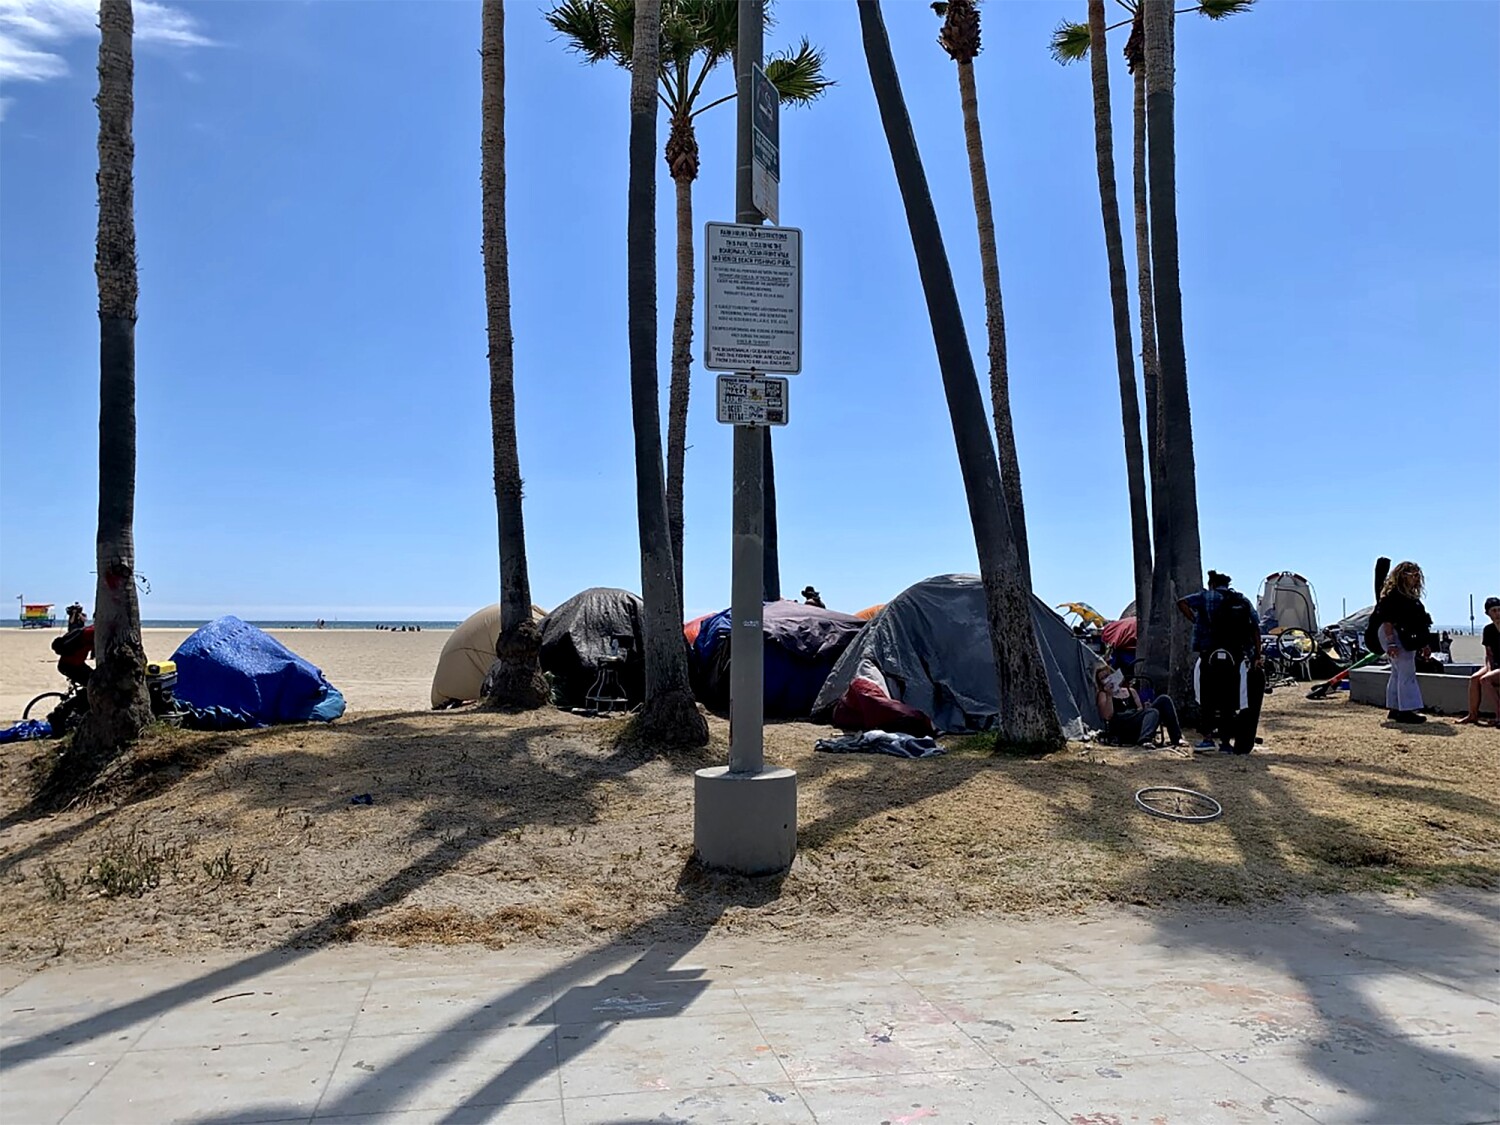 L.A.'s new plan to restrict homeless camping: What you need to know